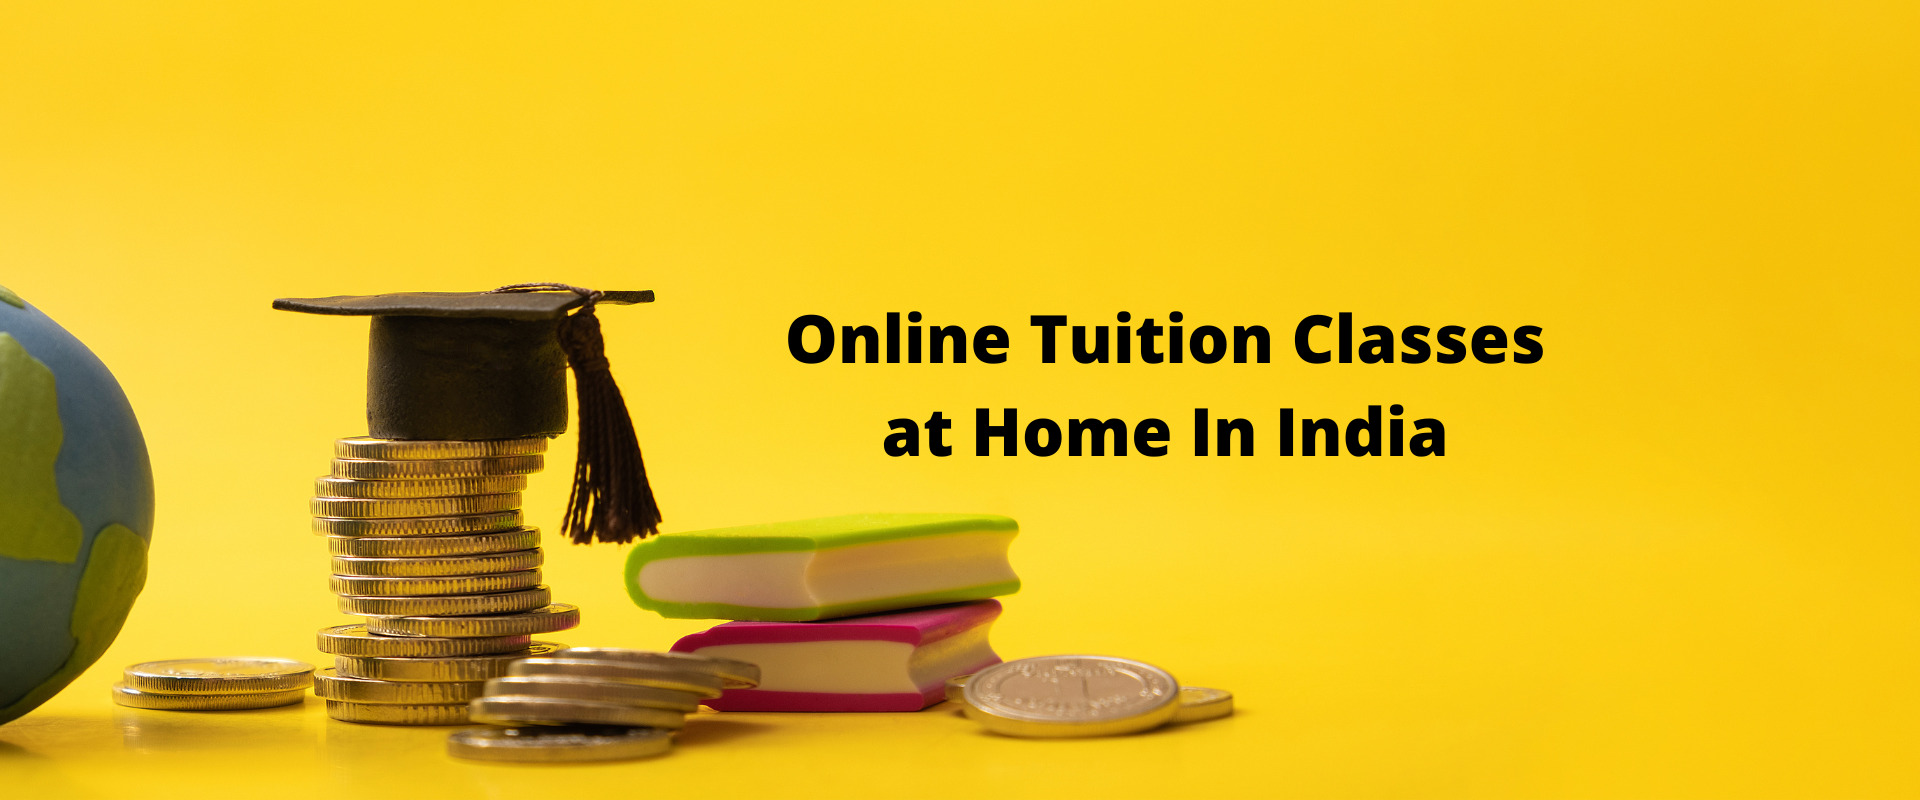 How To Start Online Tuition Classes at Home In India (8 Easy Steps)